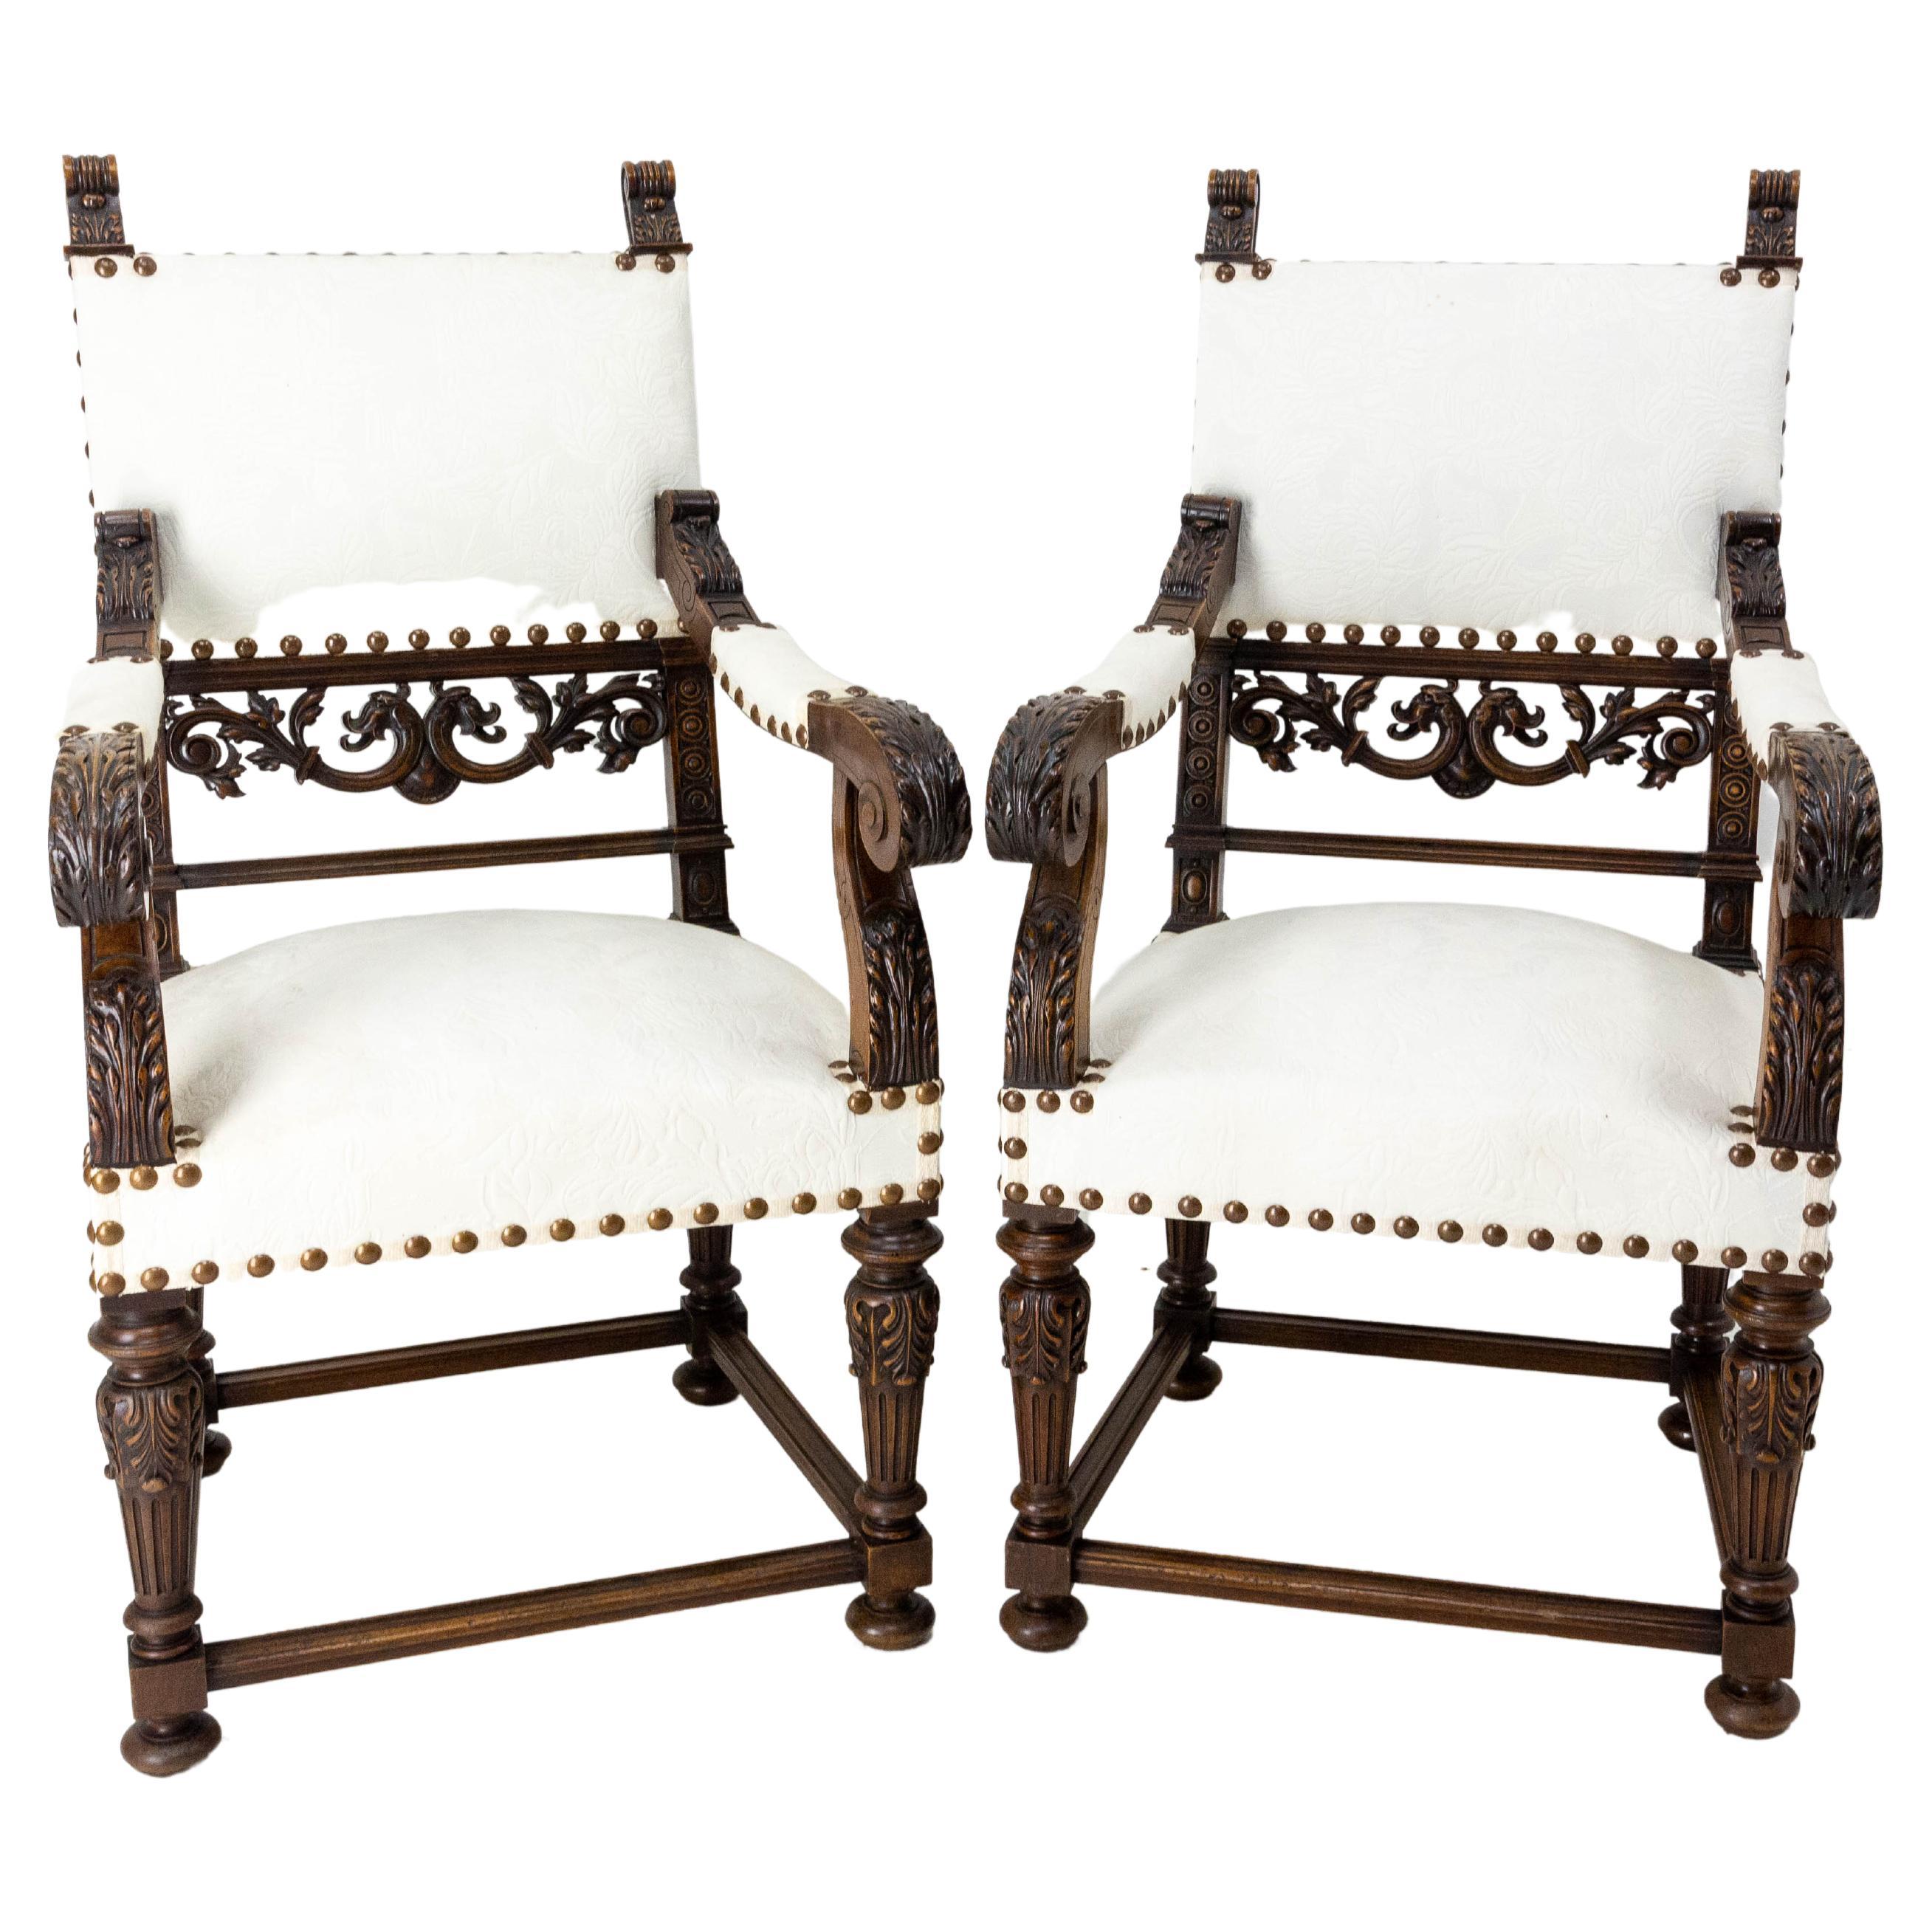 Pair of Louis XIII Revival Open Walnut Armchairs French, 19th Century to Recover